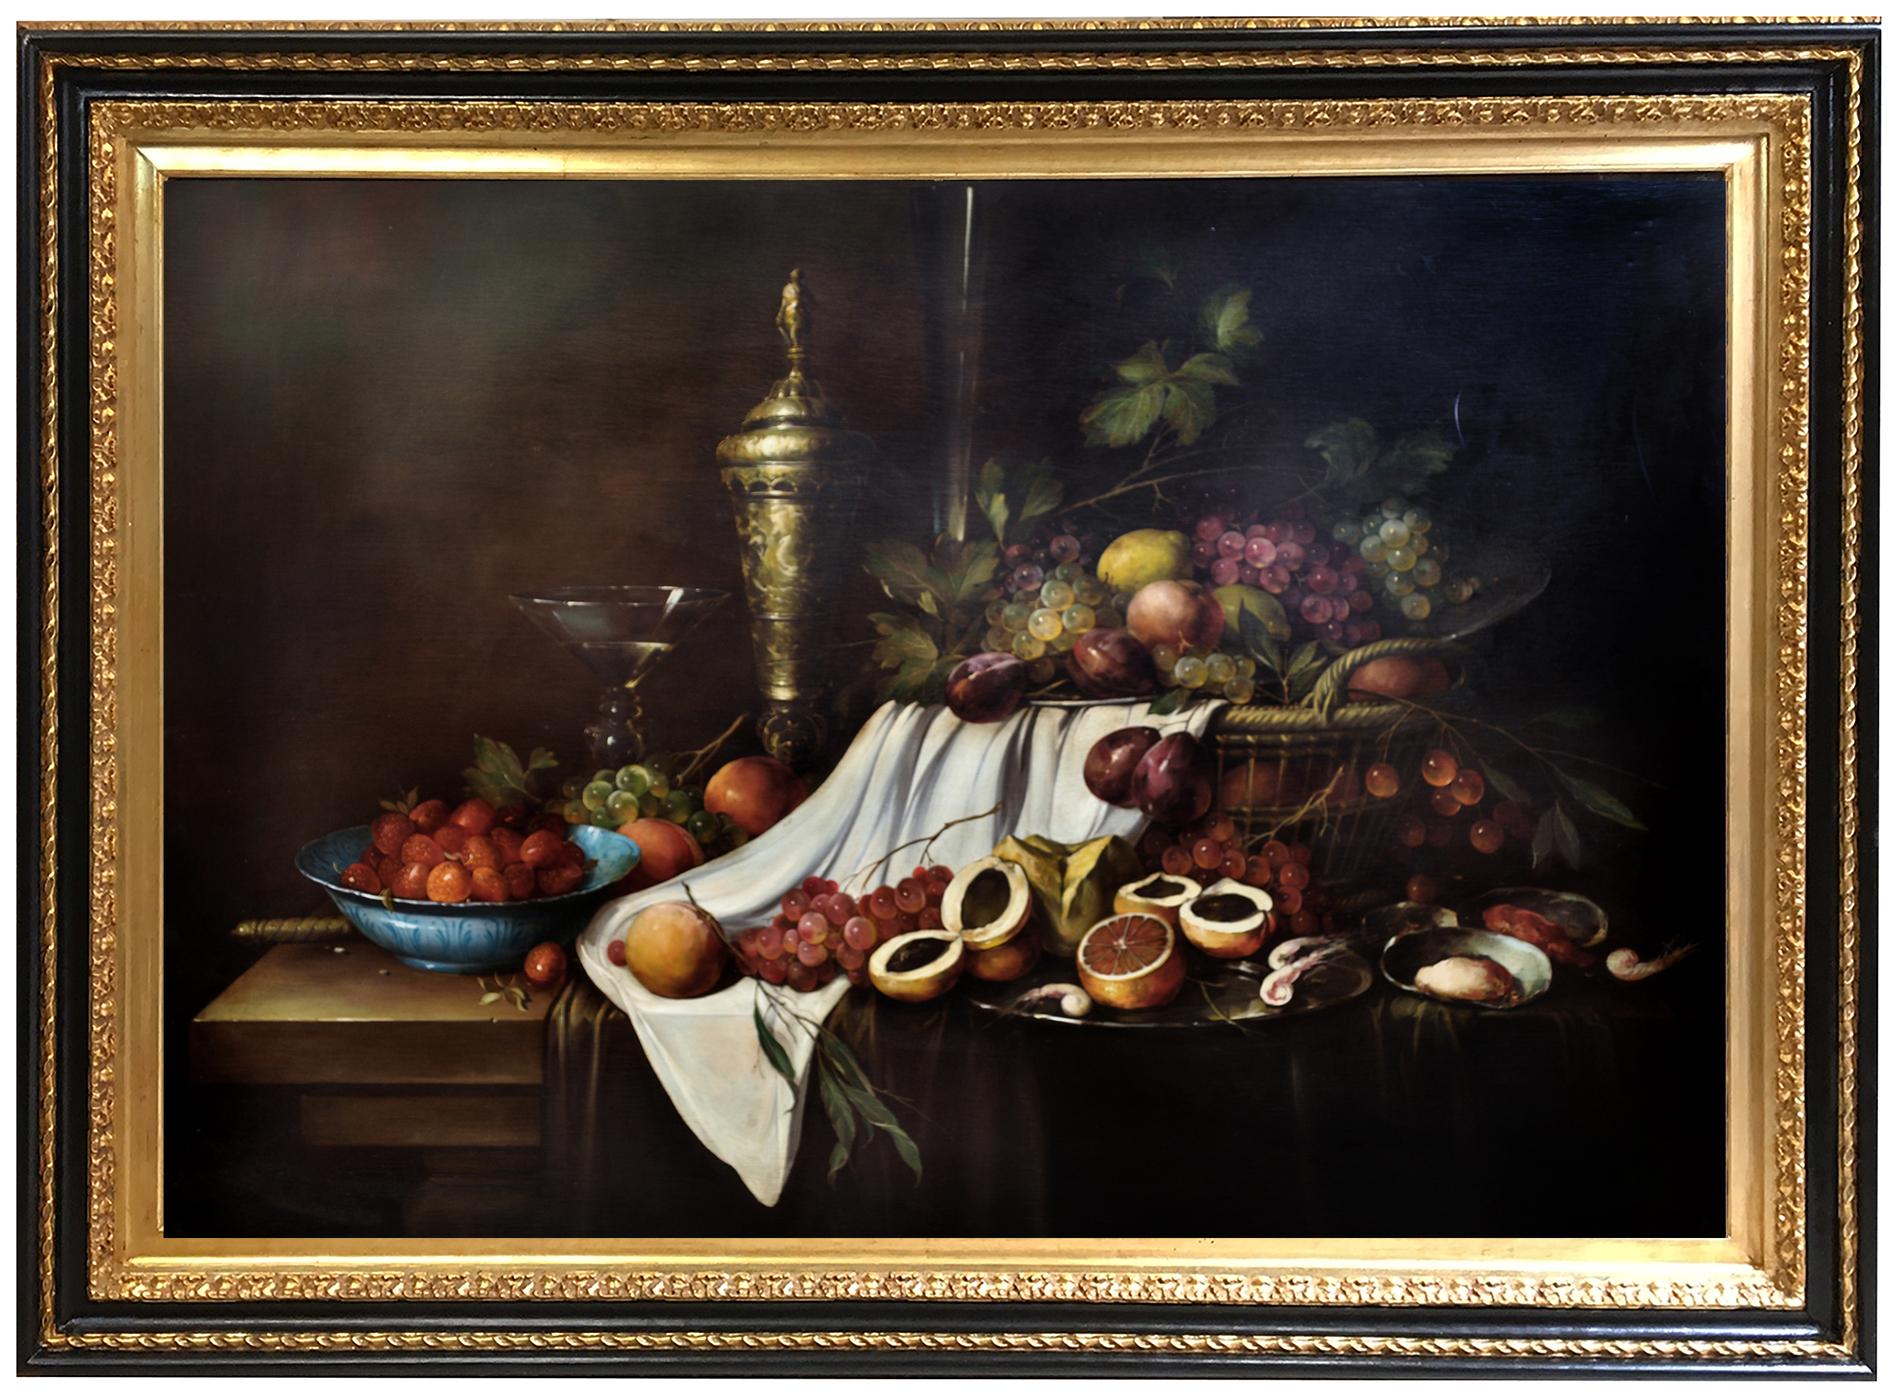 Still life - Salvatore Marinelli Italia 2007 - Oil on canvas cm. 90x120
Frame available on request from our workshop.